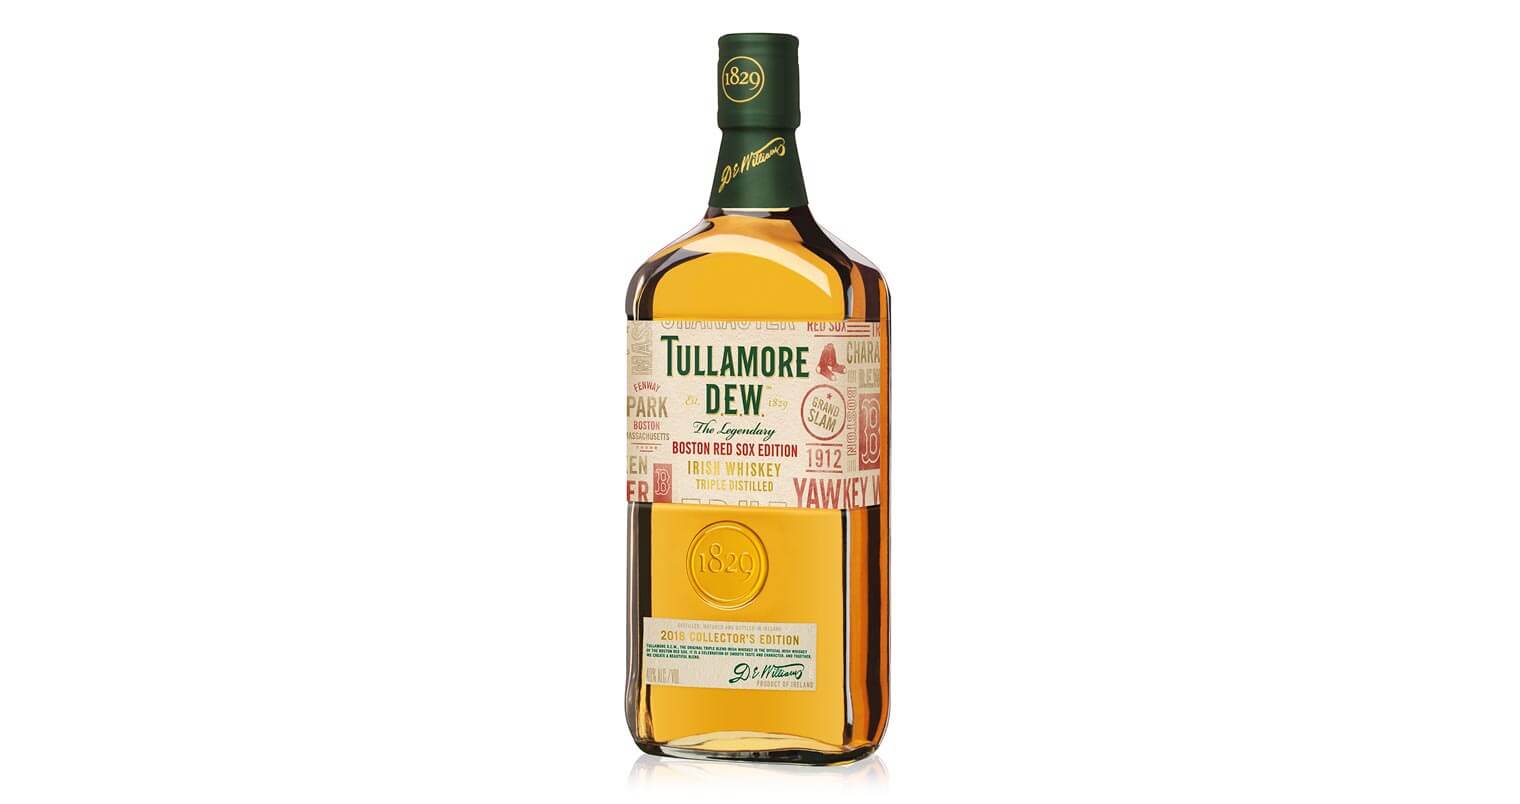 Tullamore D.E.W. Limited-Edition Boston Red Sox Bottle, bottle on white, featured image